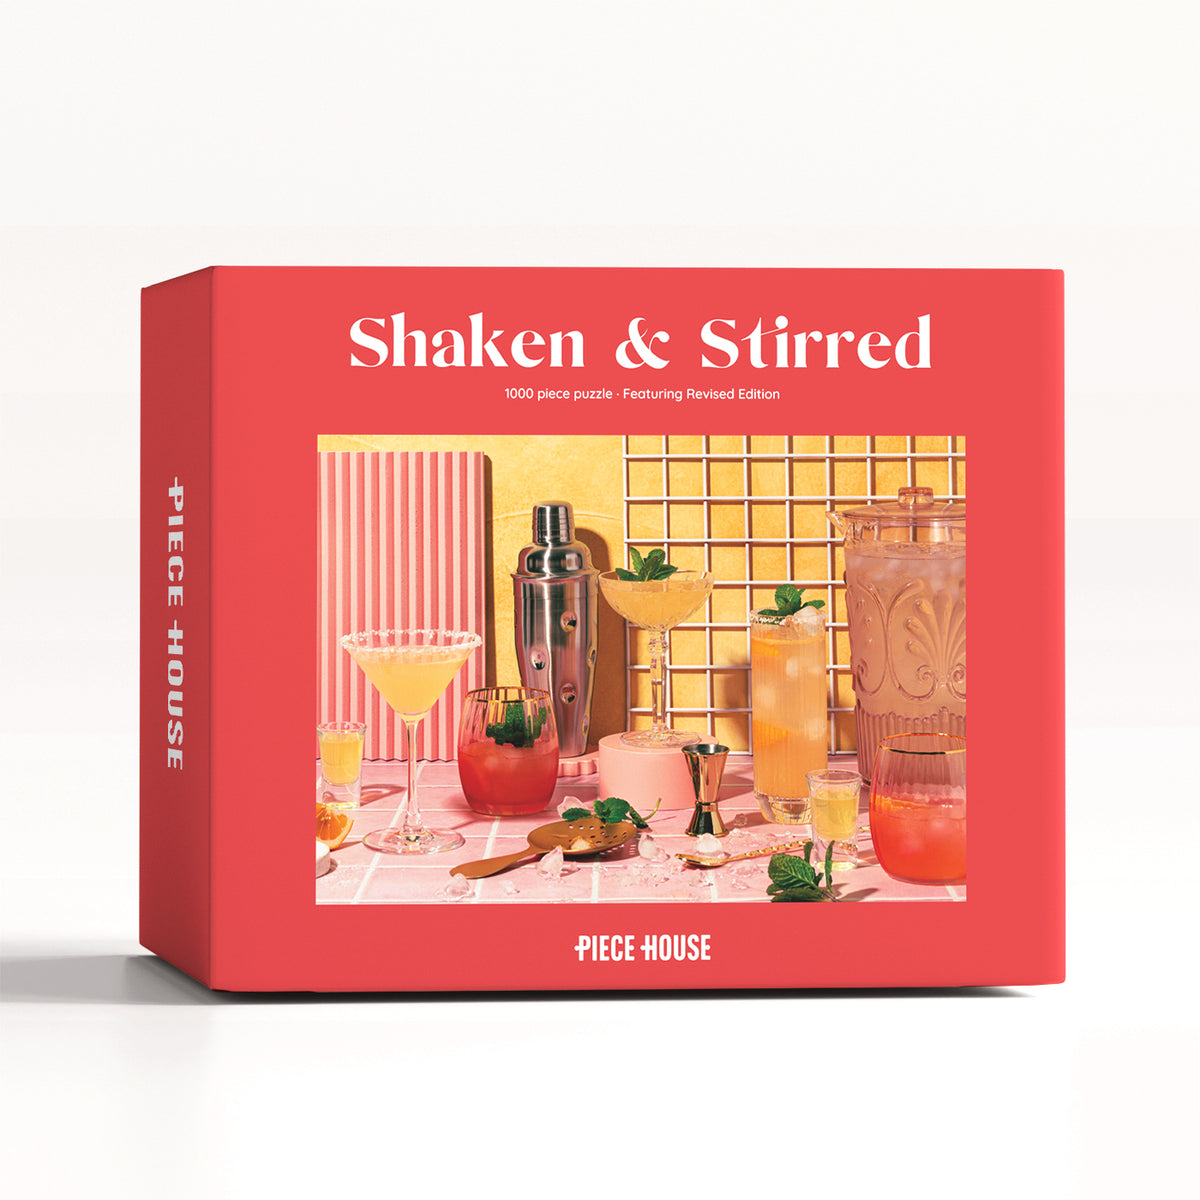 Shaken & Stirred Piece House Puzzle 1000 Piece Quality Adult Jigsaw Cocktail